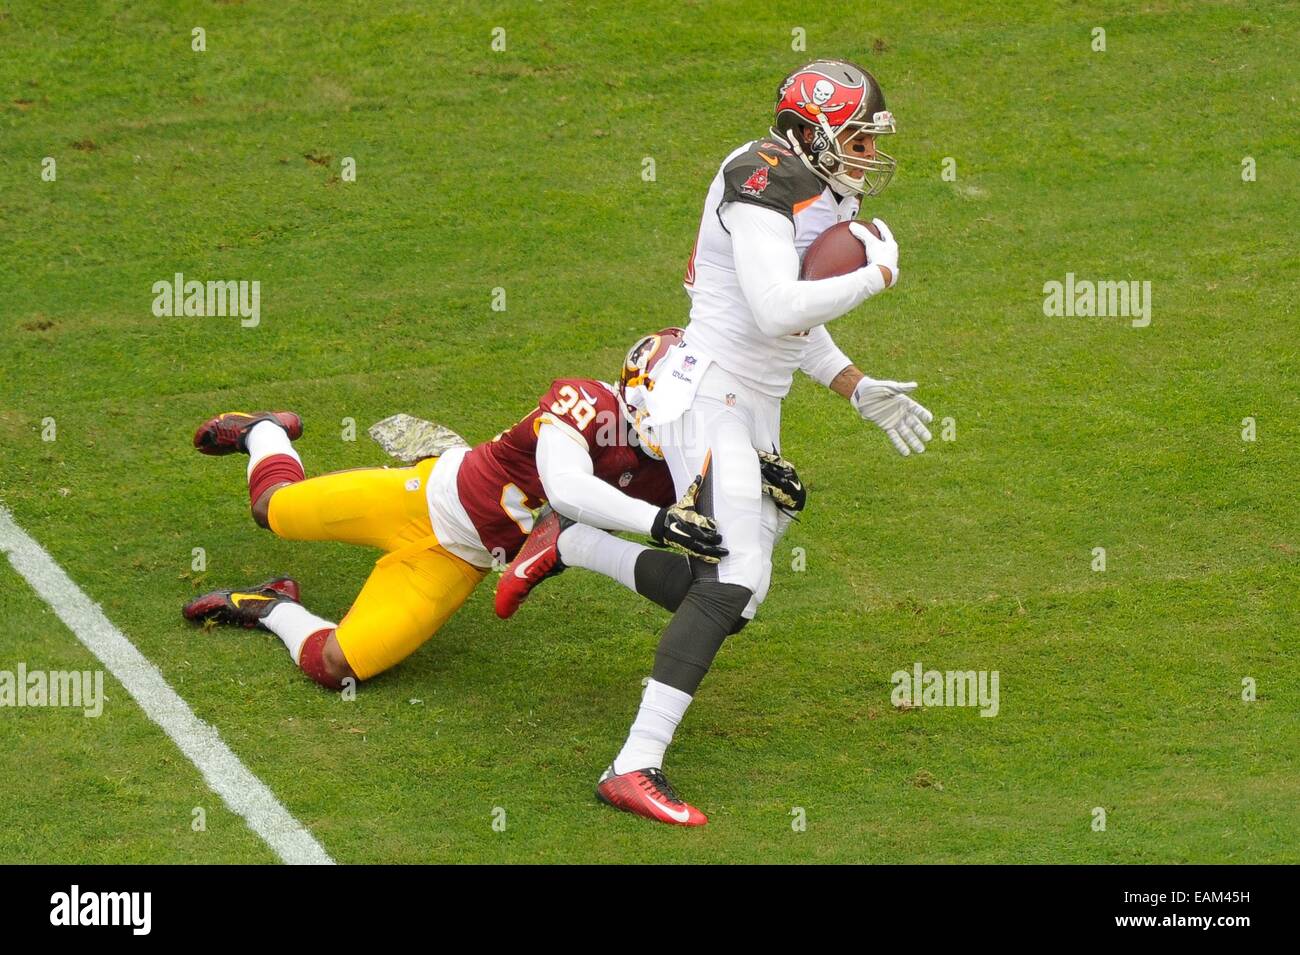 NOV 16, 2014 : Washington Redskins cornerback David Amerson (39) tackles Tampa Bay Buccaneers wide receiver Mike Evans (13) during the matchup between the Tampa Bay Buccaneers and the Washington Redskins at FedEx Field in Landover, MD. Stock Photo